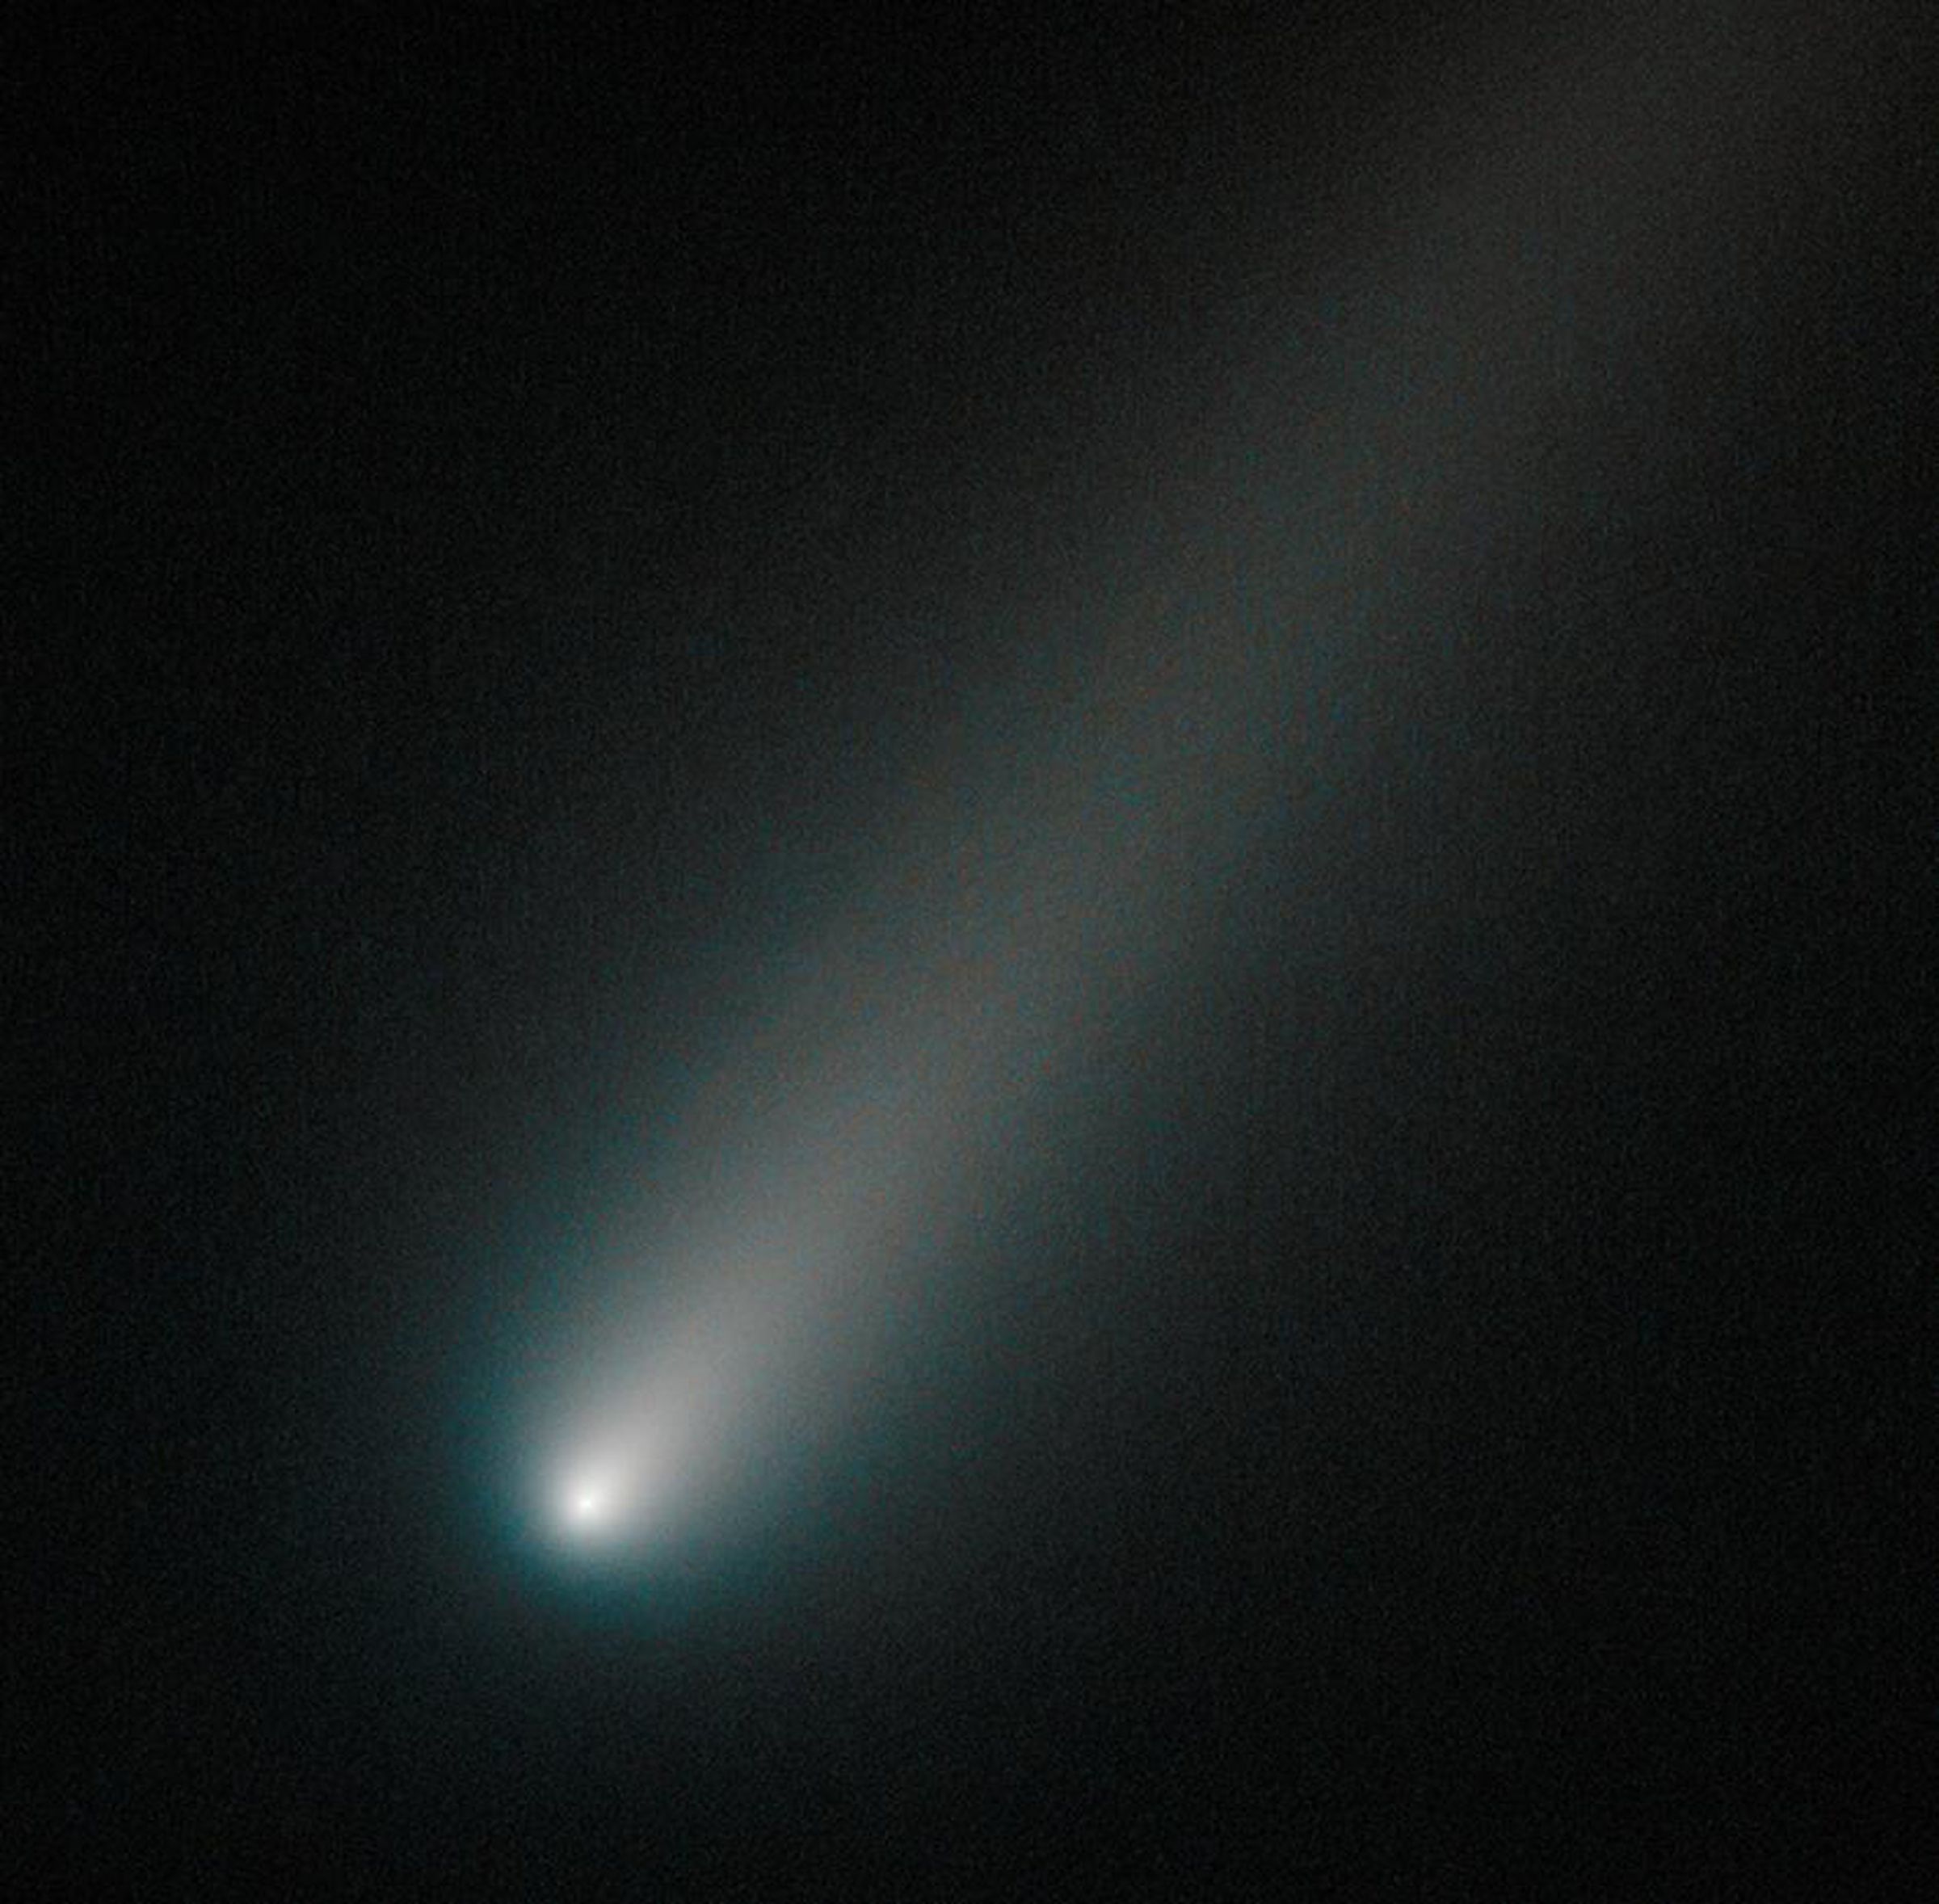 The comet ISON and its tail of gas and dust, as seen by the Hubble Space Telescope